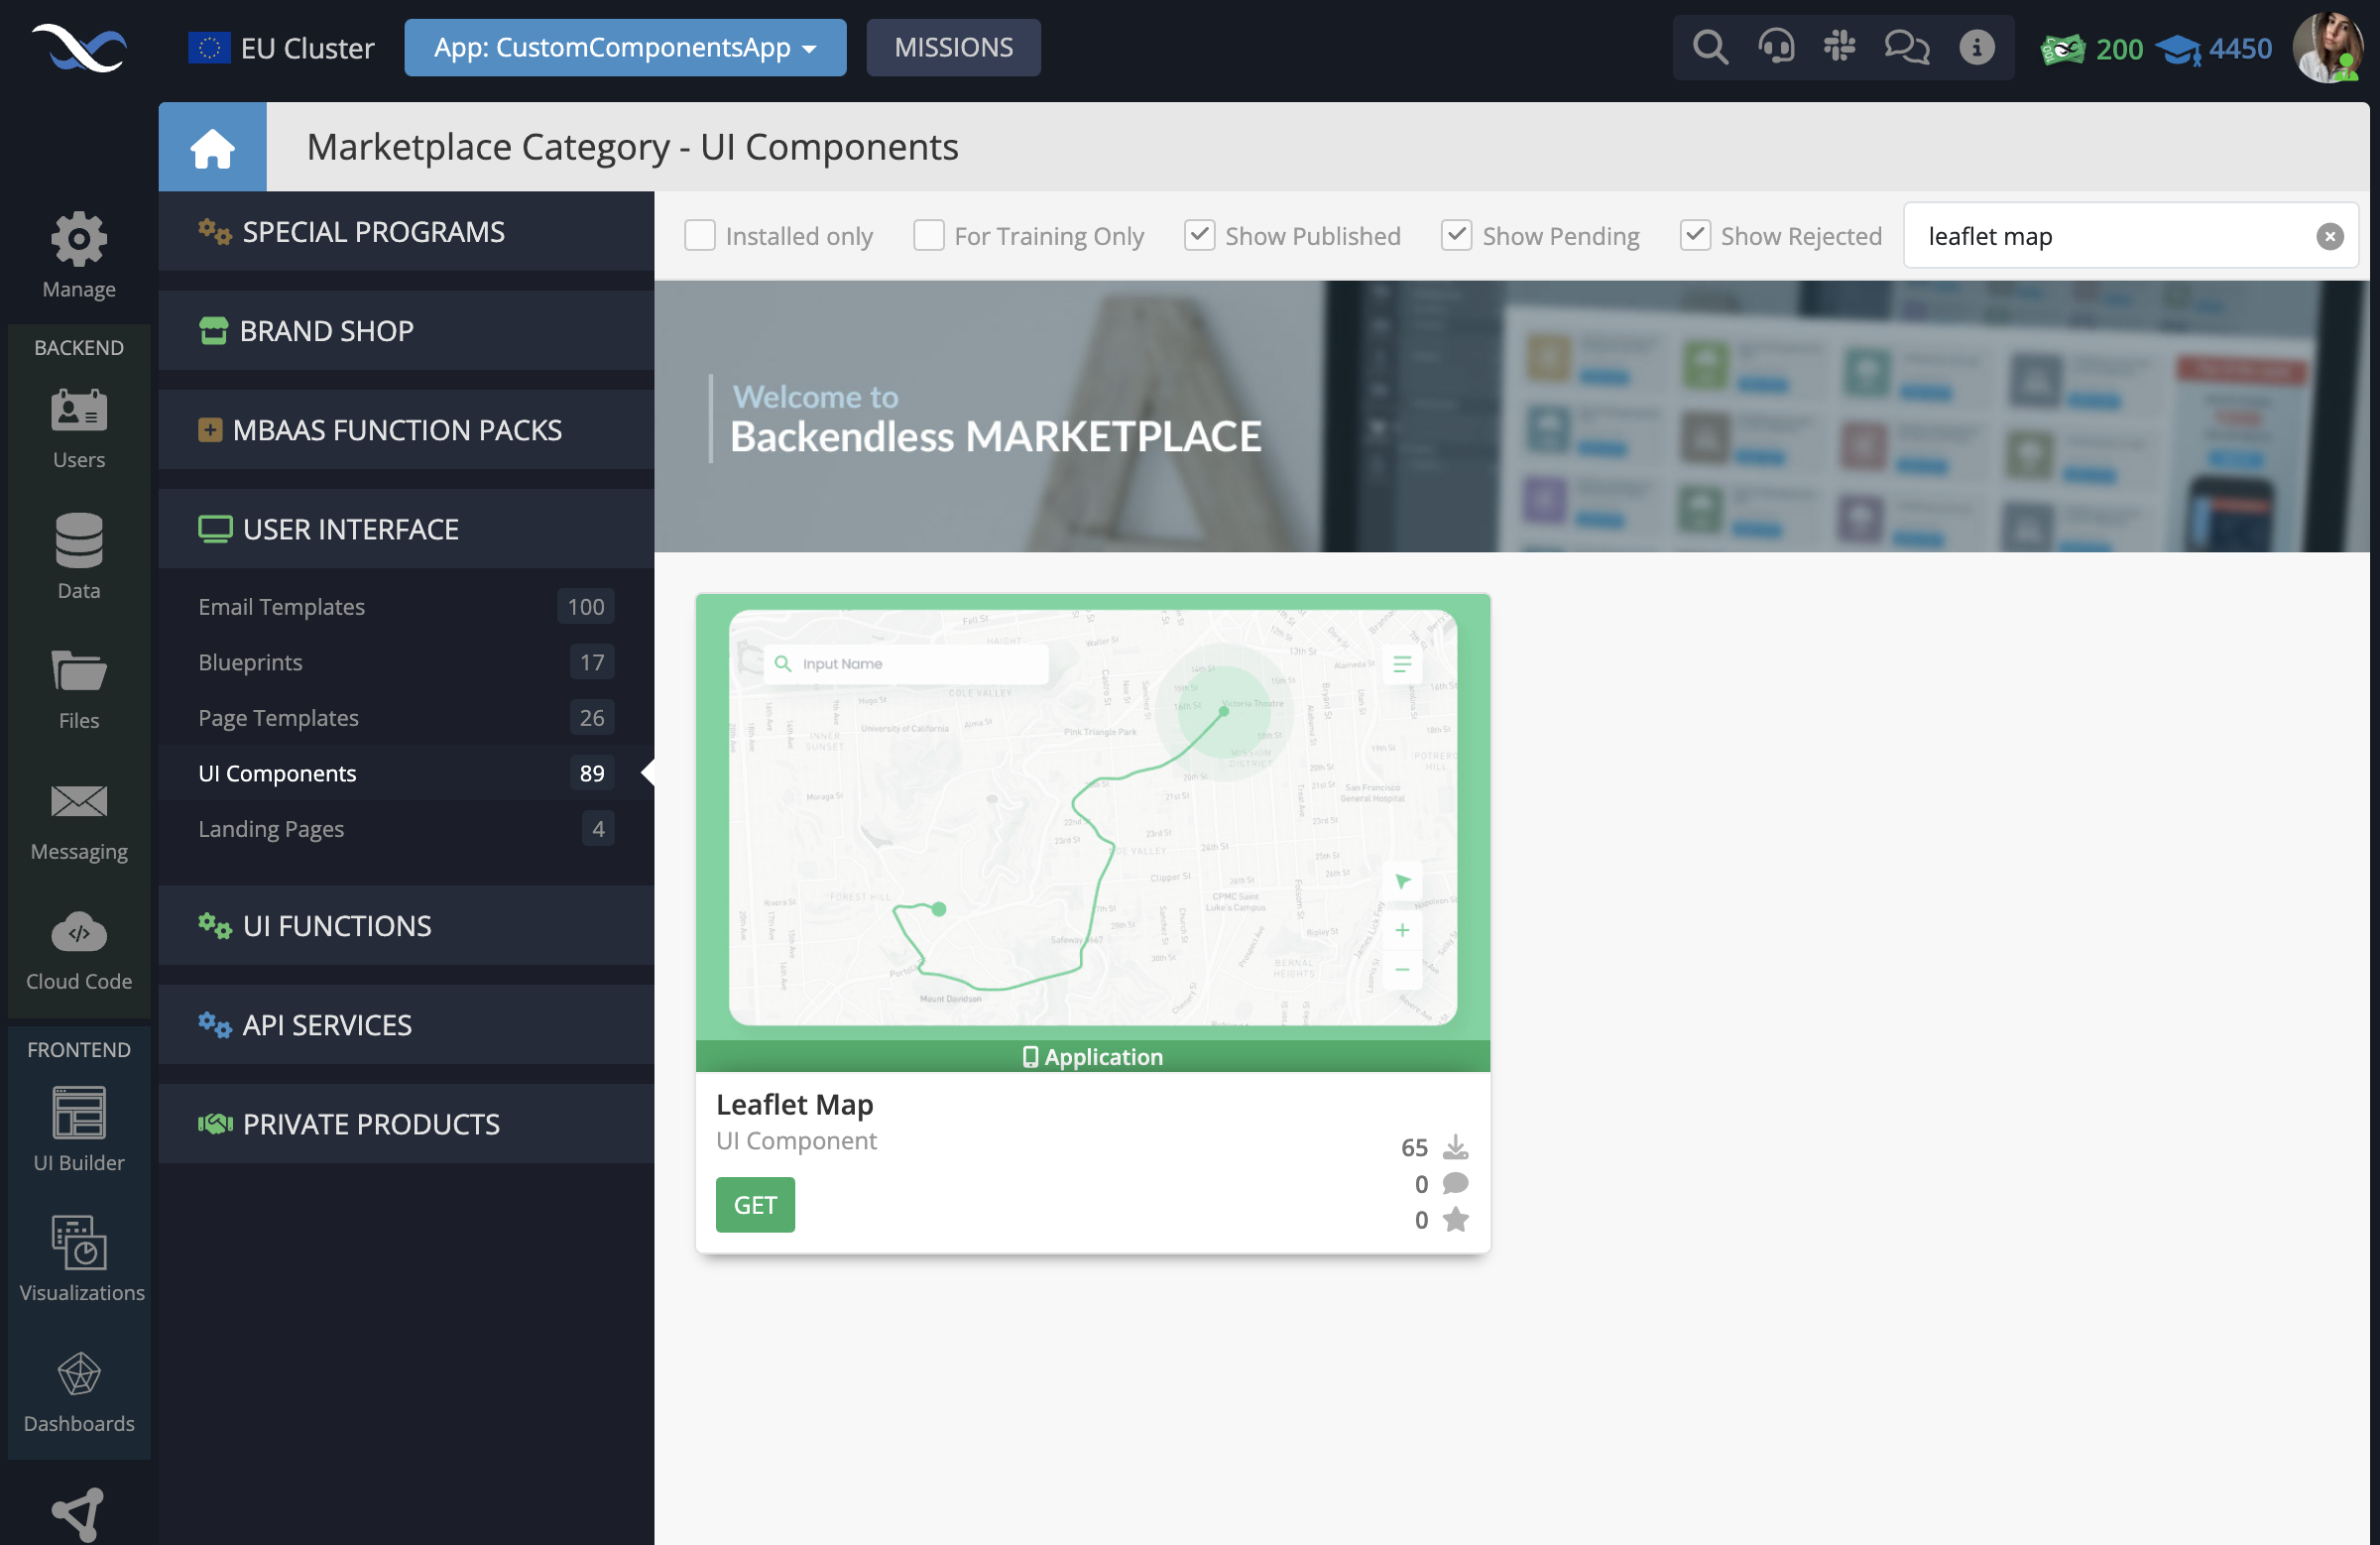 In your Backendless App, go to the Marketplace -> User Interface tab and install the Leaflet Map component